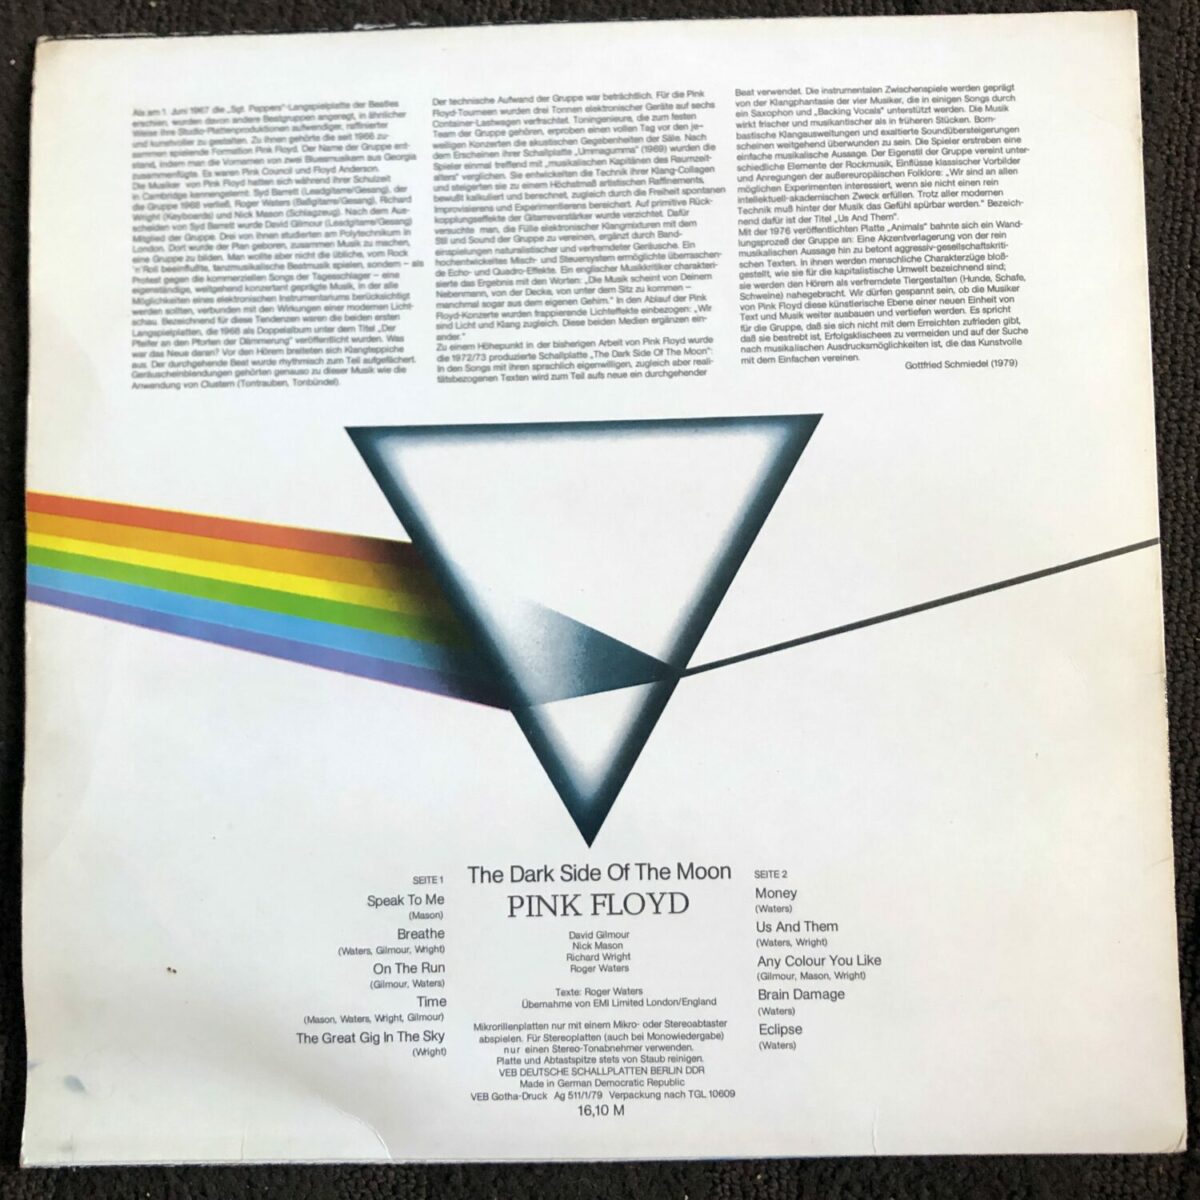 "The dark side of the moon" by Pink Floyd